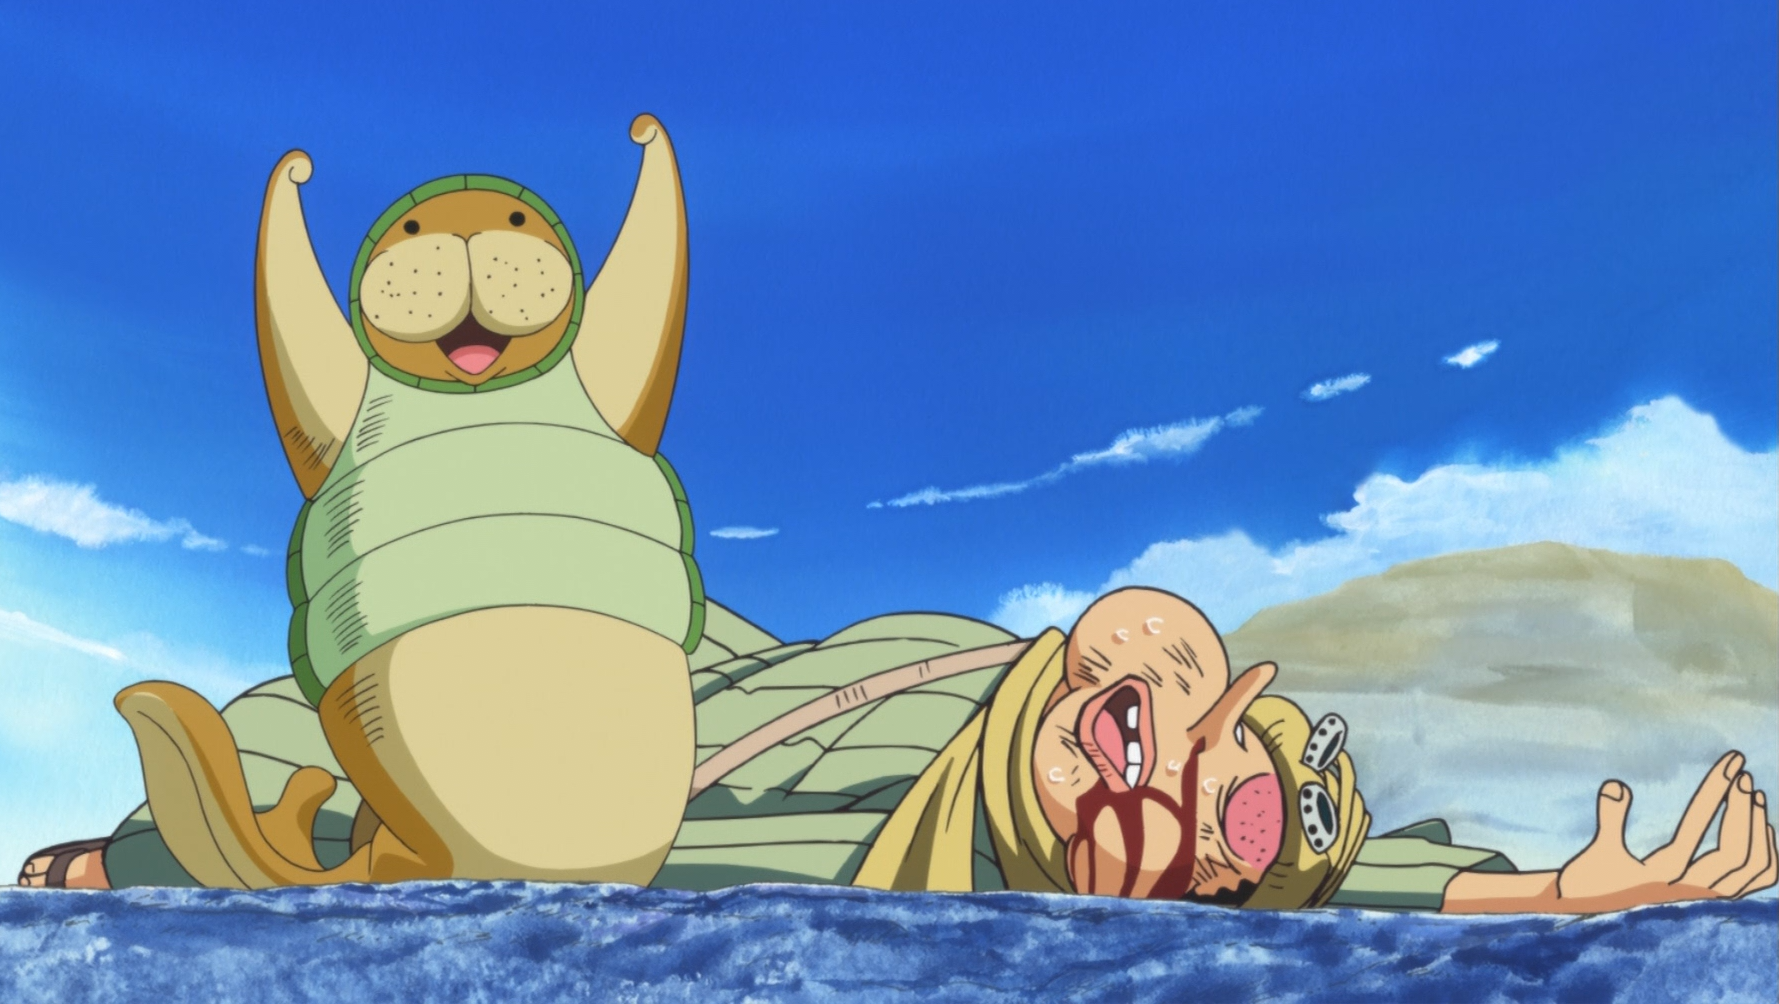 🐑 THE SPIRIT OF MERRY 🐑, One Piece - Episode 247